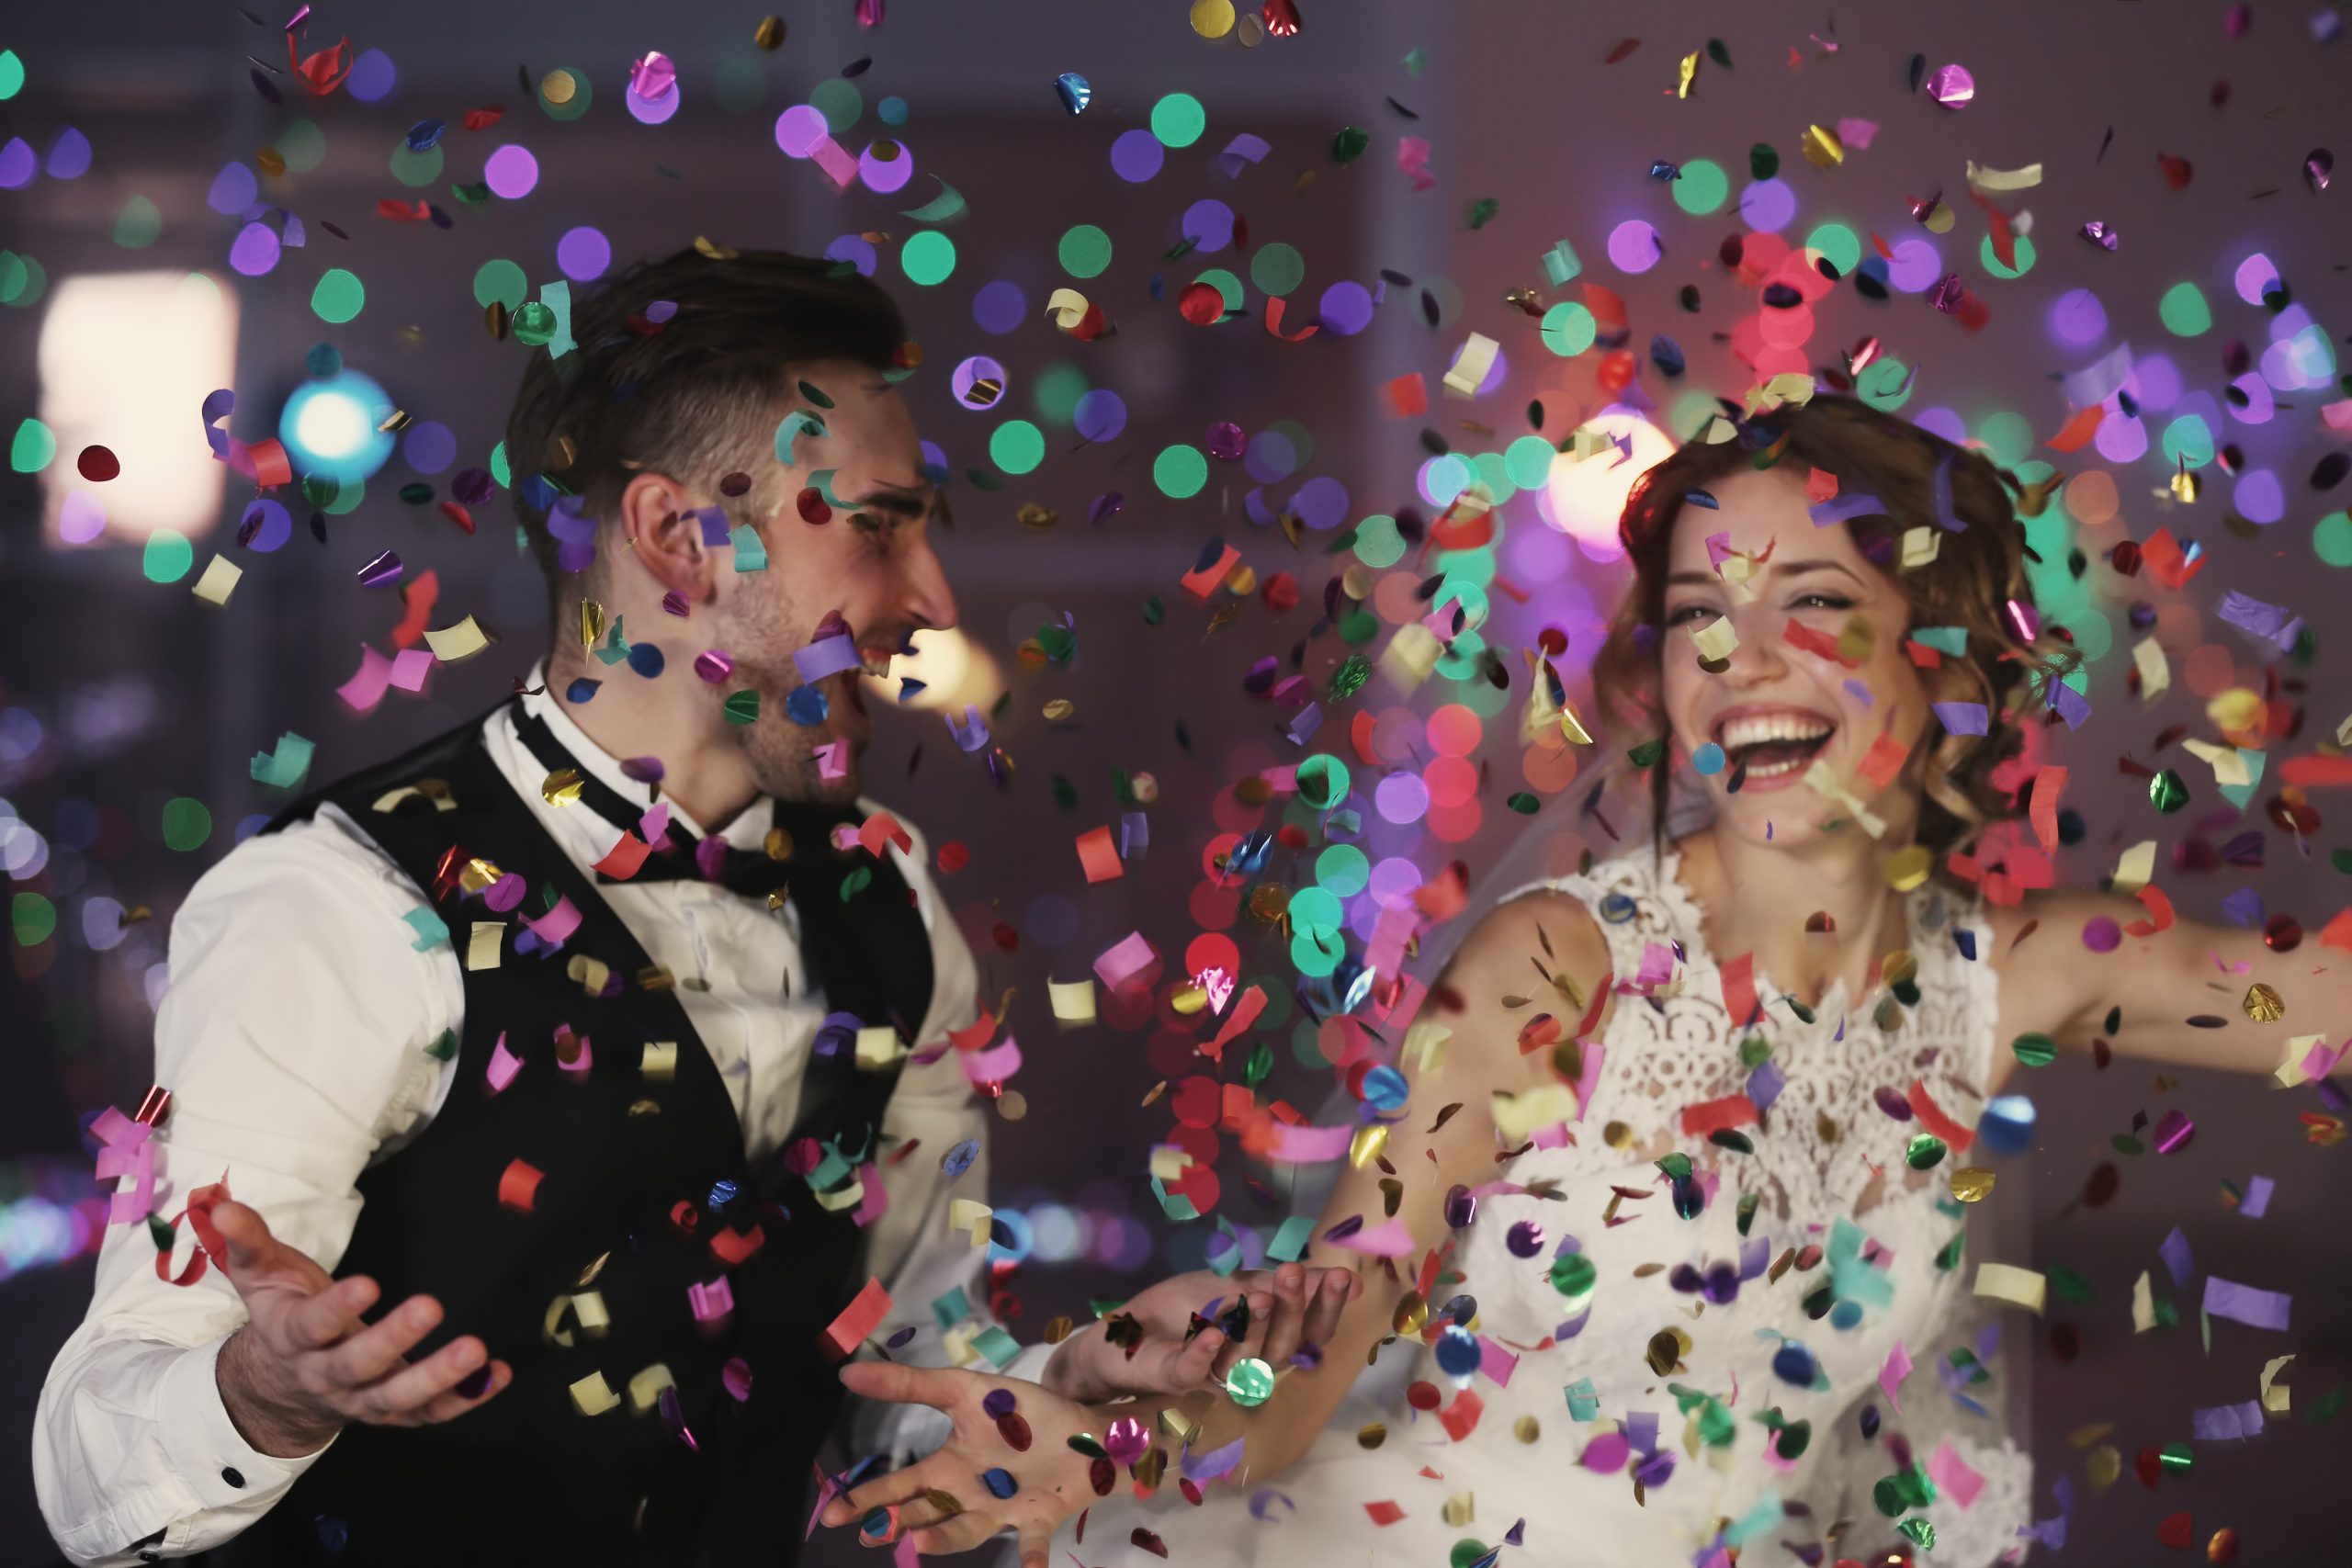 AdobeStock 136249219 scaled - Top 5 Wedding Entertainment Ideas - photo-booth-news, events-entertainment